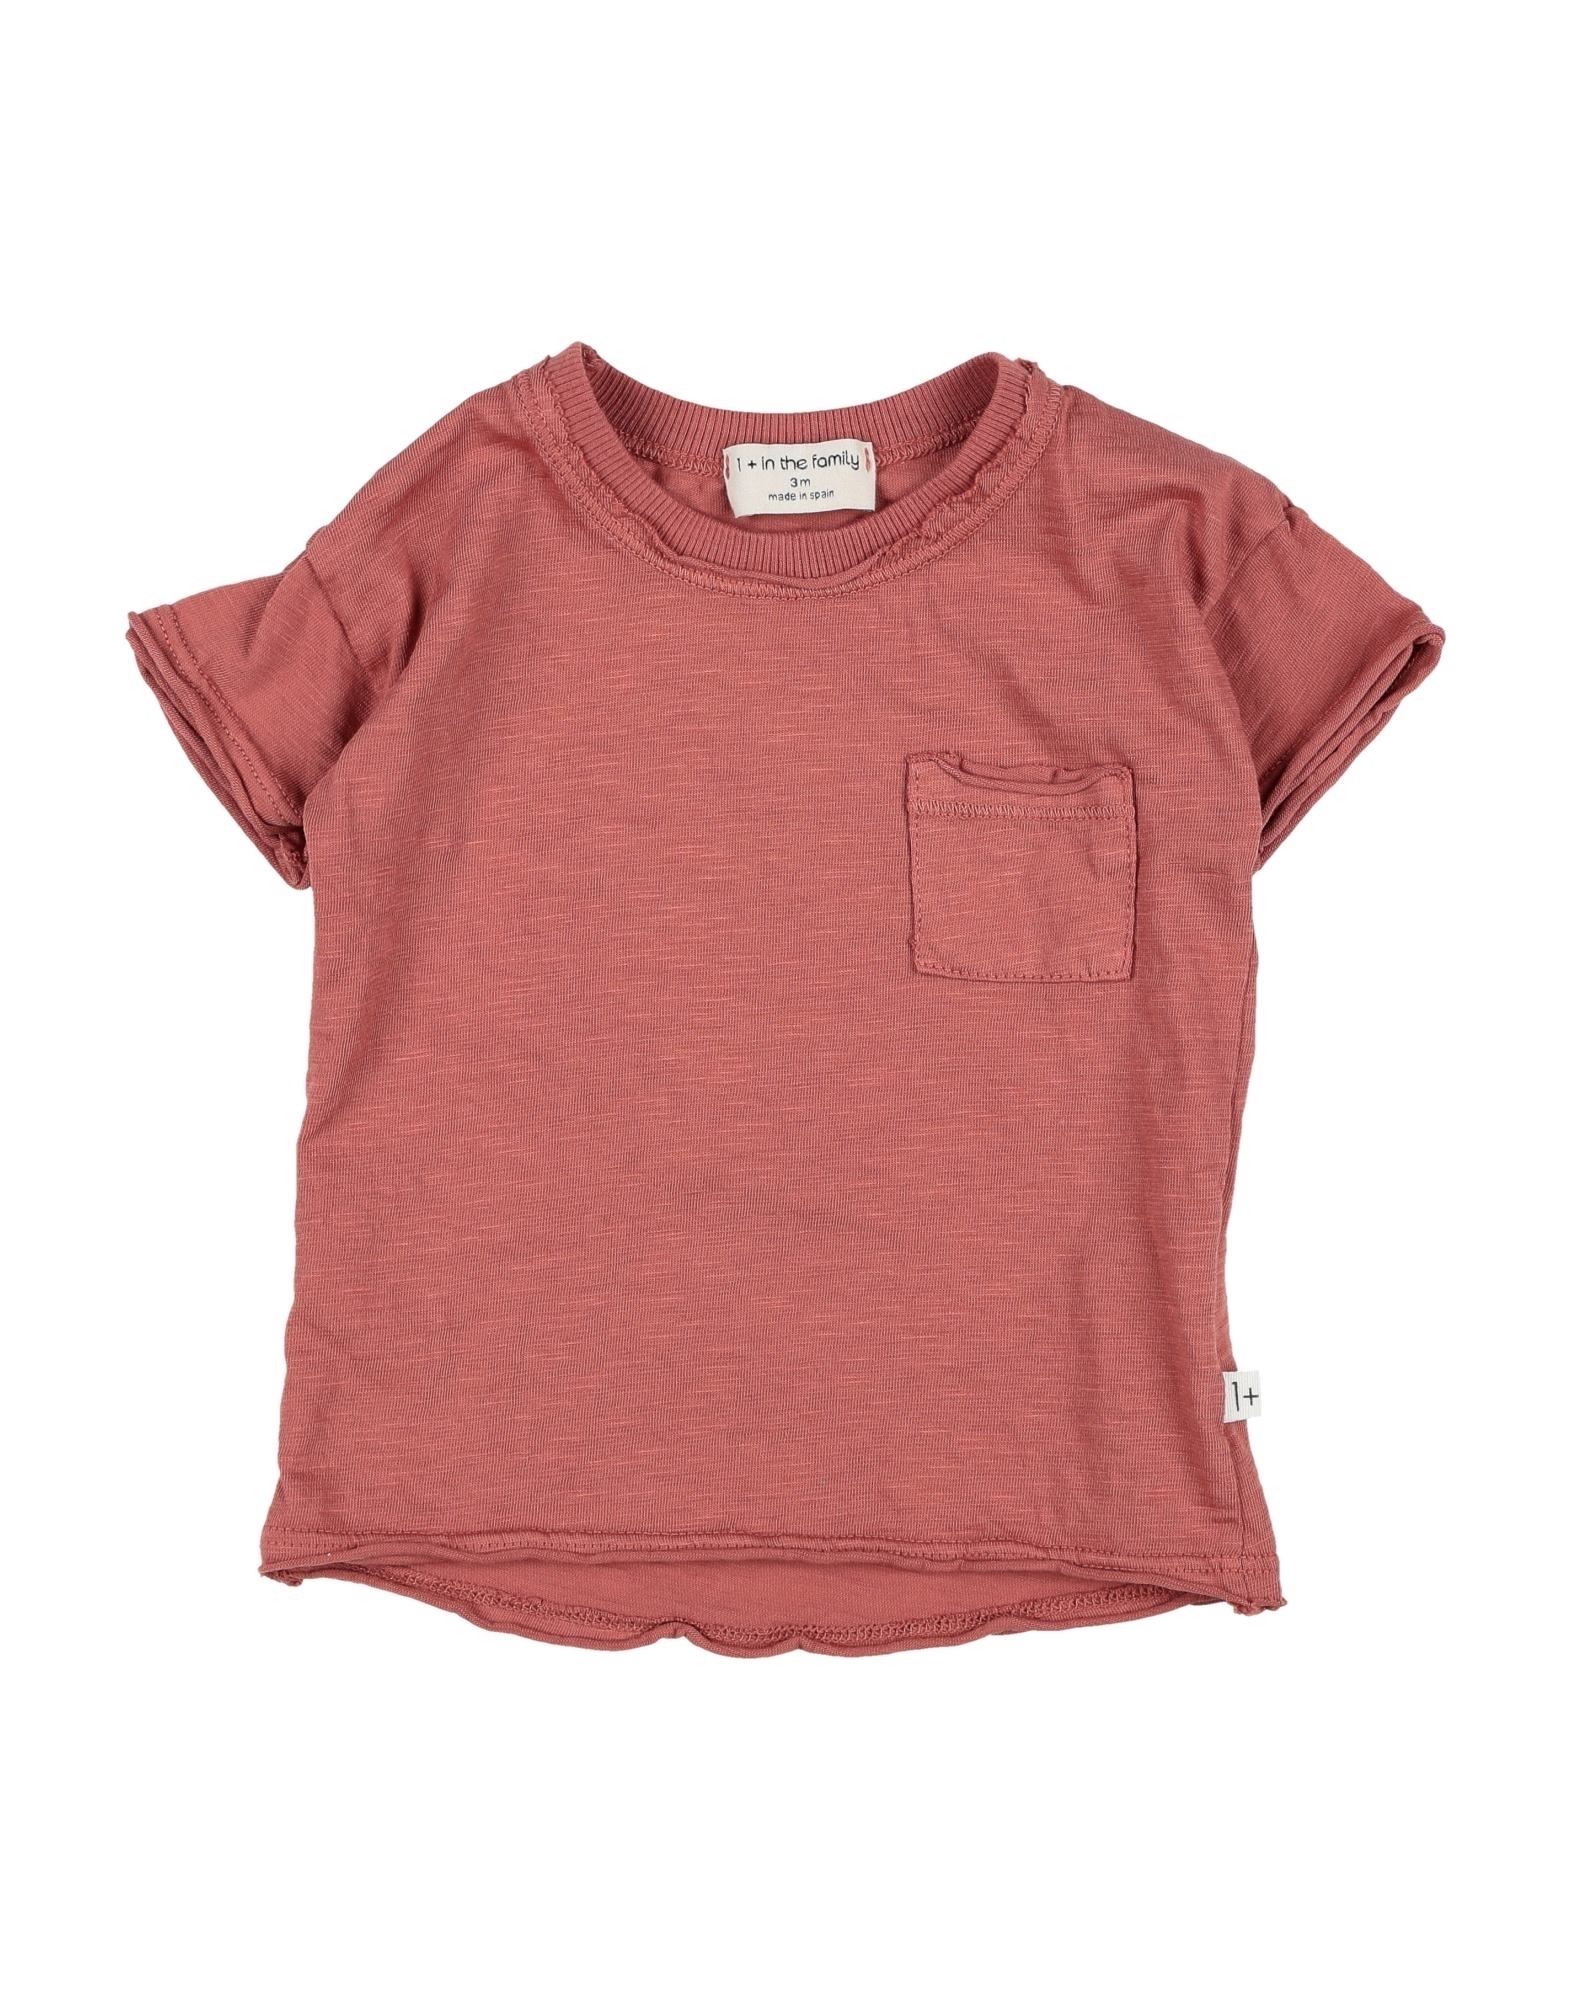 1+ In The Family Kids' 1 + In The Family Newborn Boy T-shirt Rust Size 3 Cotton, Elastane In Red